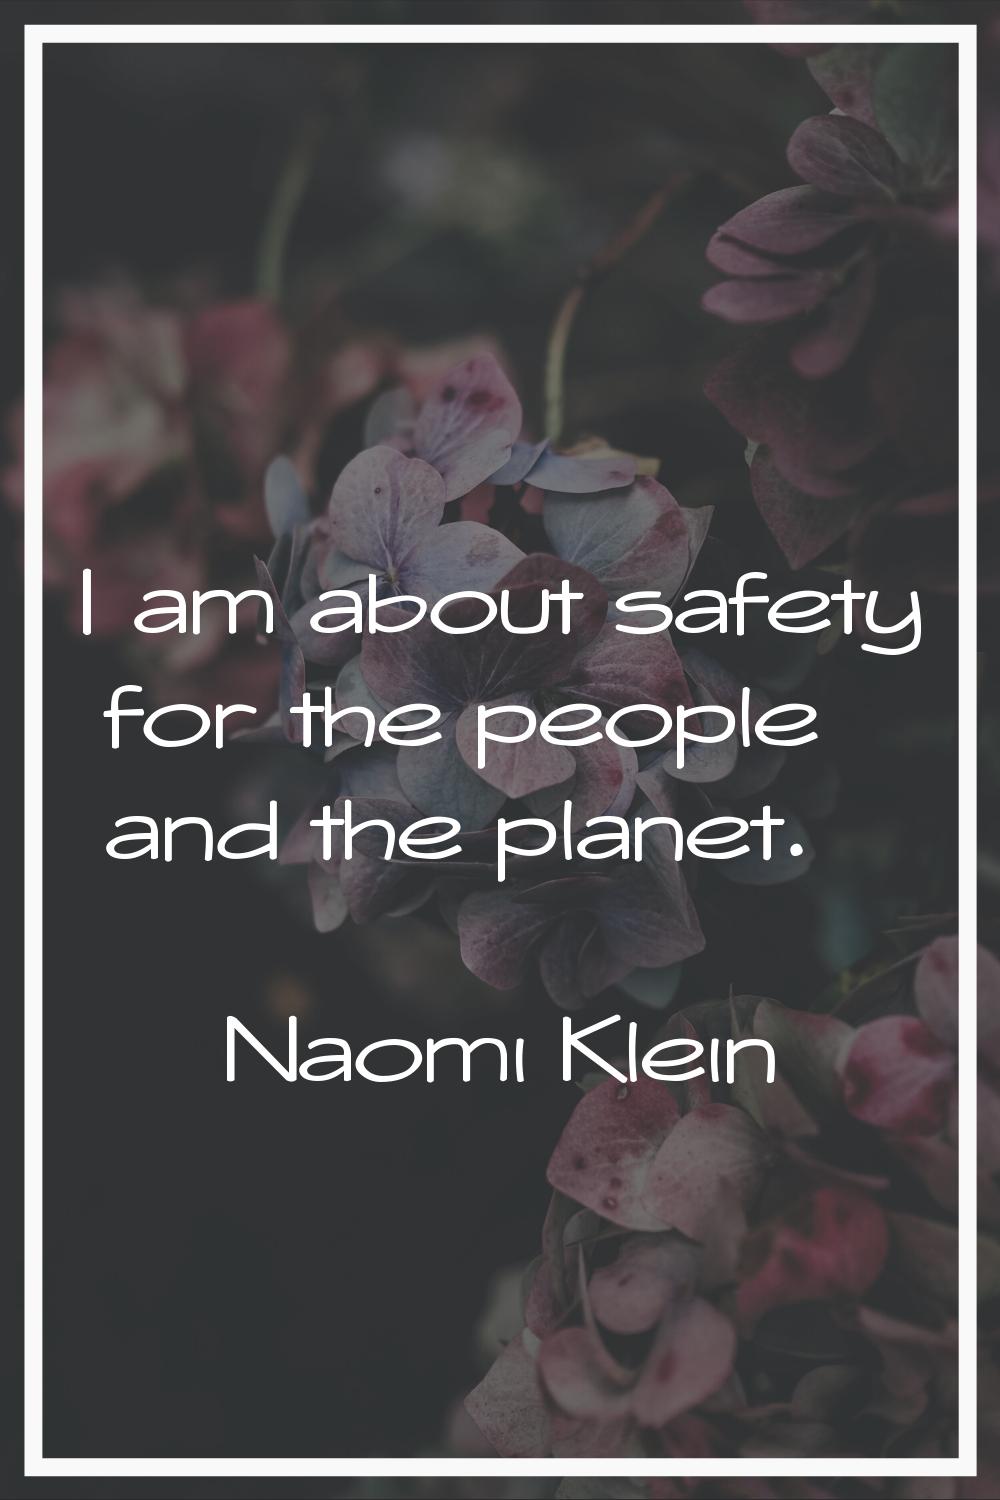 I am about safety for the people and the planet.